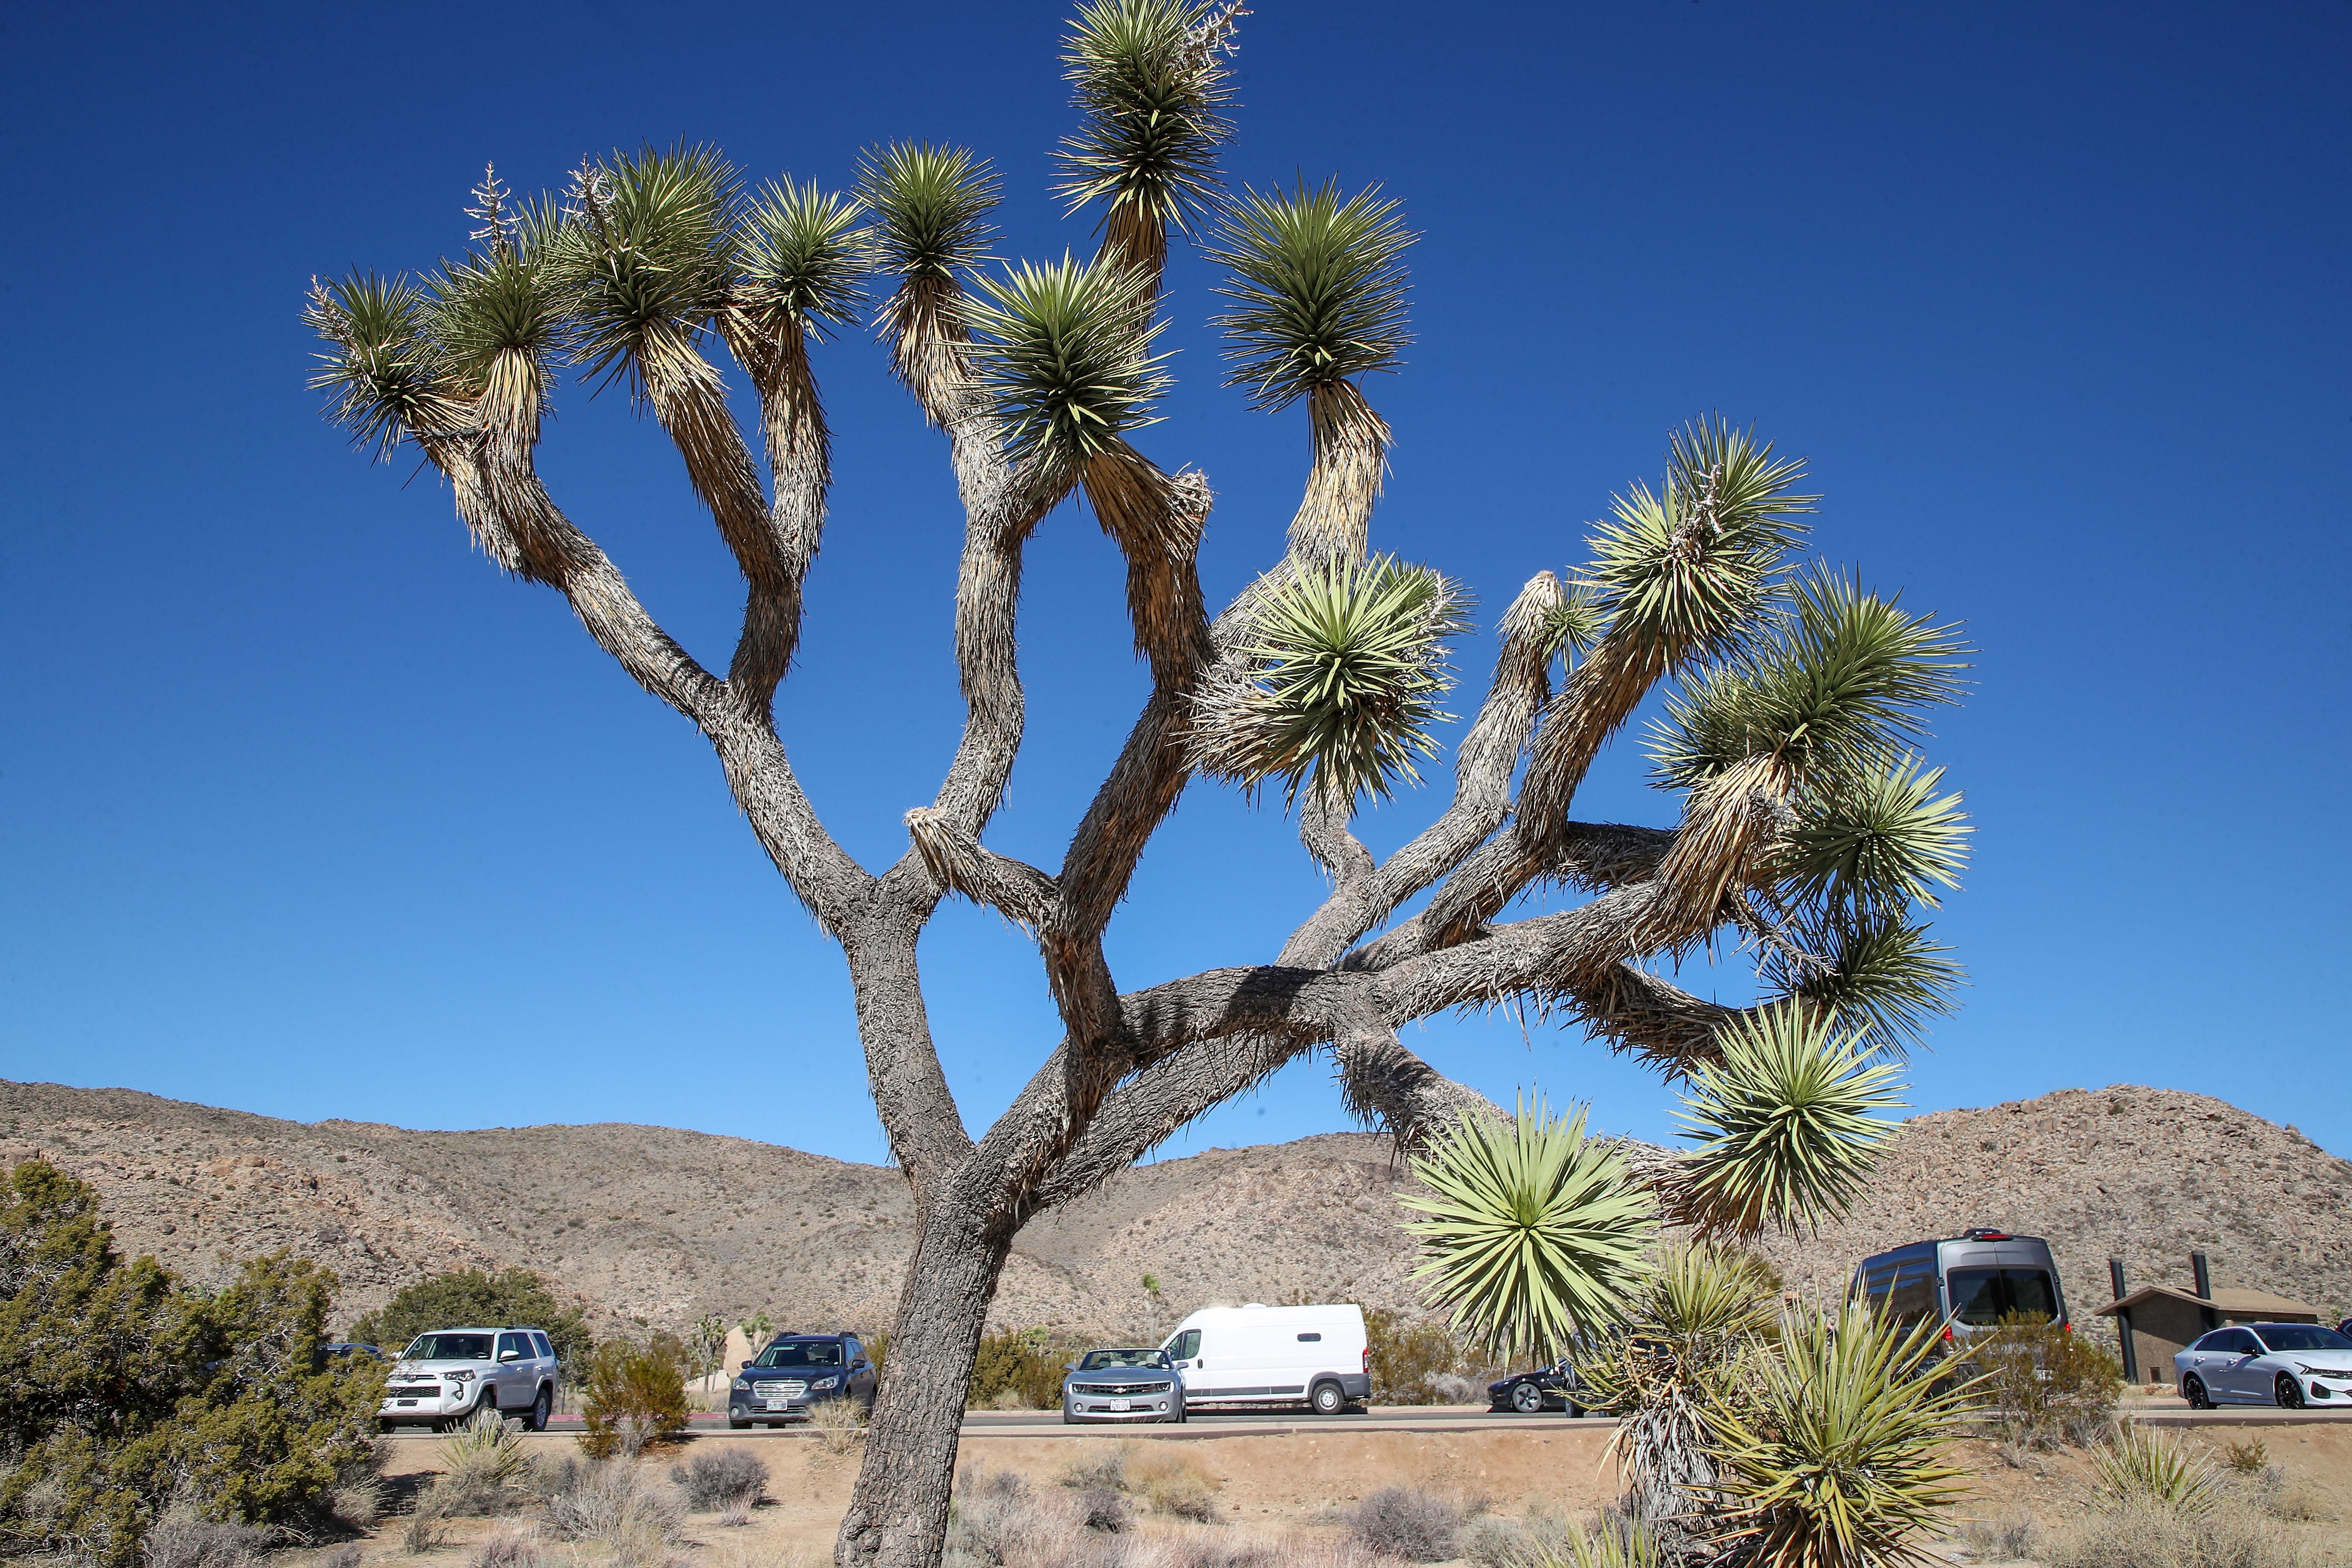 Legend has it that Mormon immigrants who’d made it across the mighty Colorado River in the mid-1800s named the iconic Joshua trees after the biblical figure Joshua, seeing the trees’ limbs as outstretched in supplication, guiding them westward.